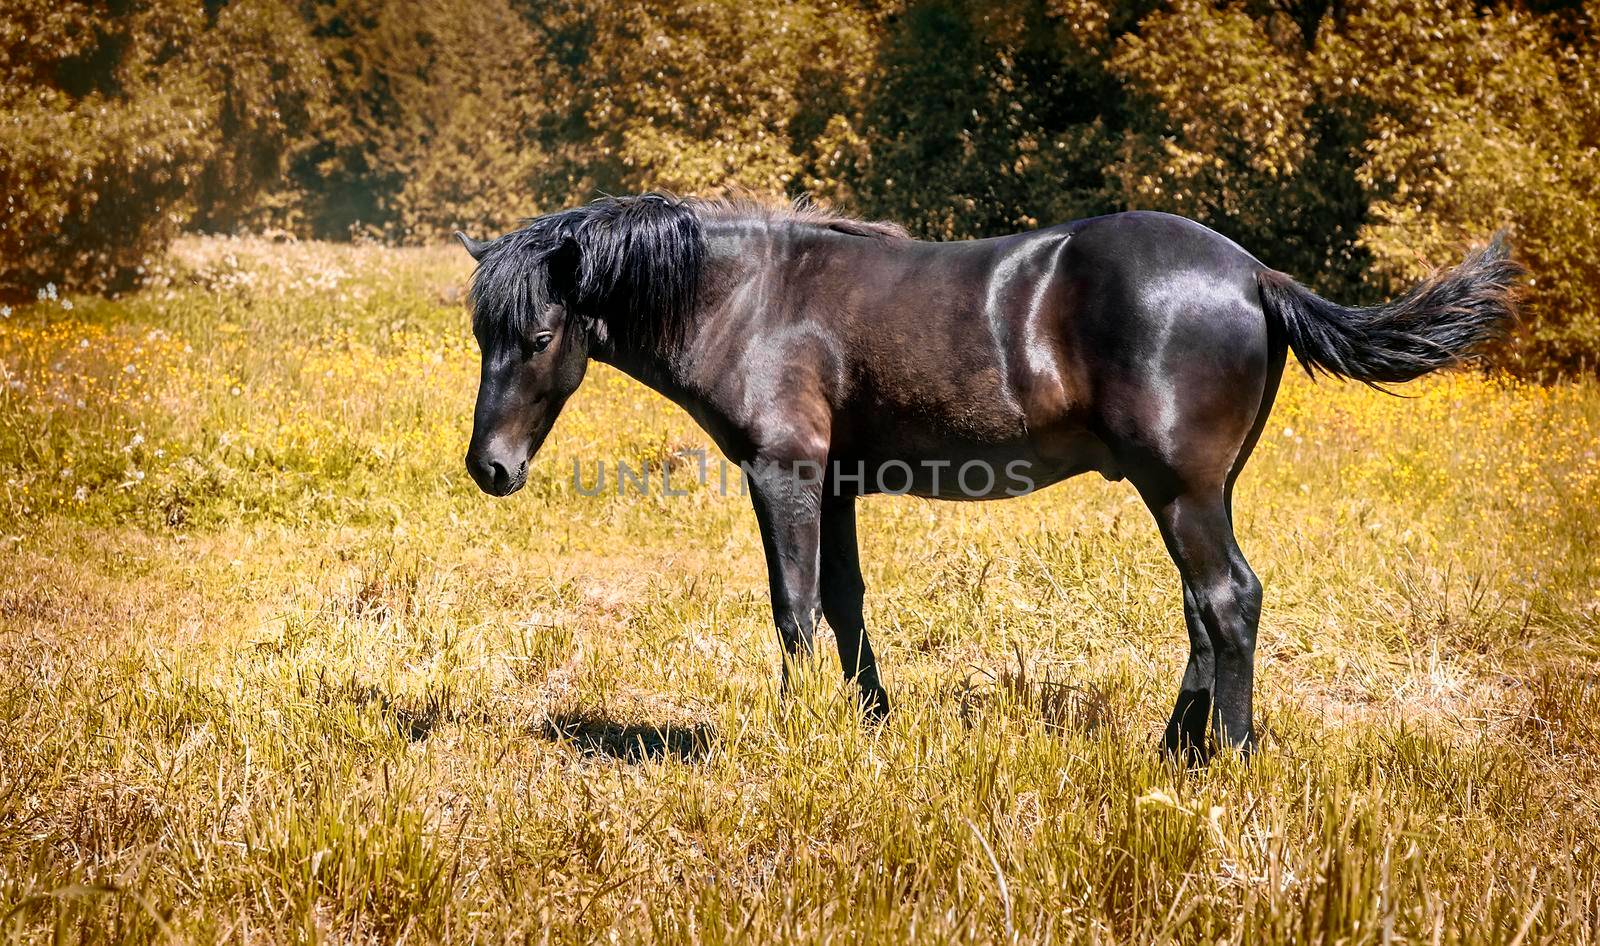 In a Sunny meadow on the edge of the forest grazing horse.